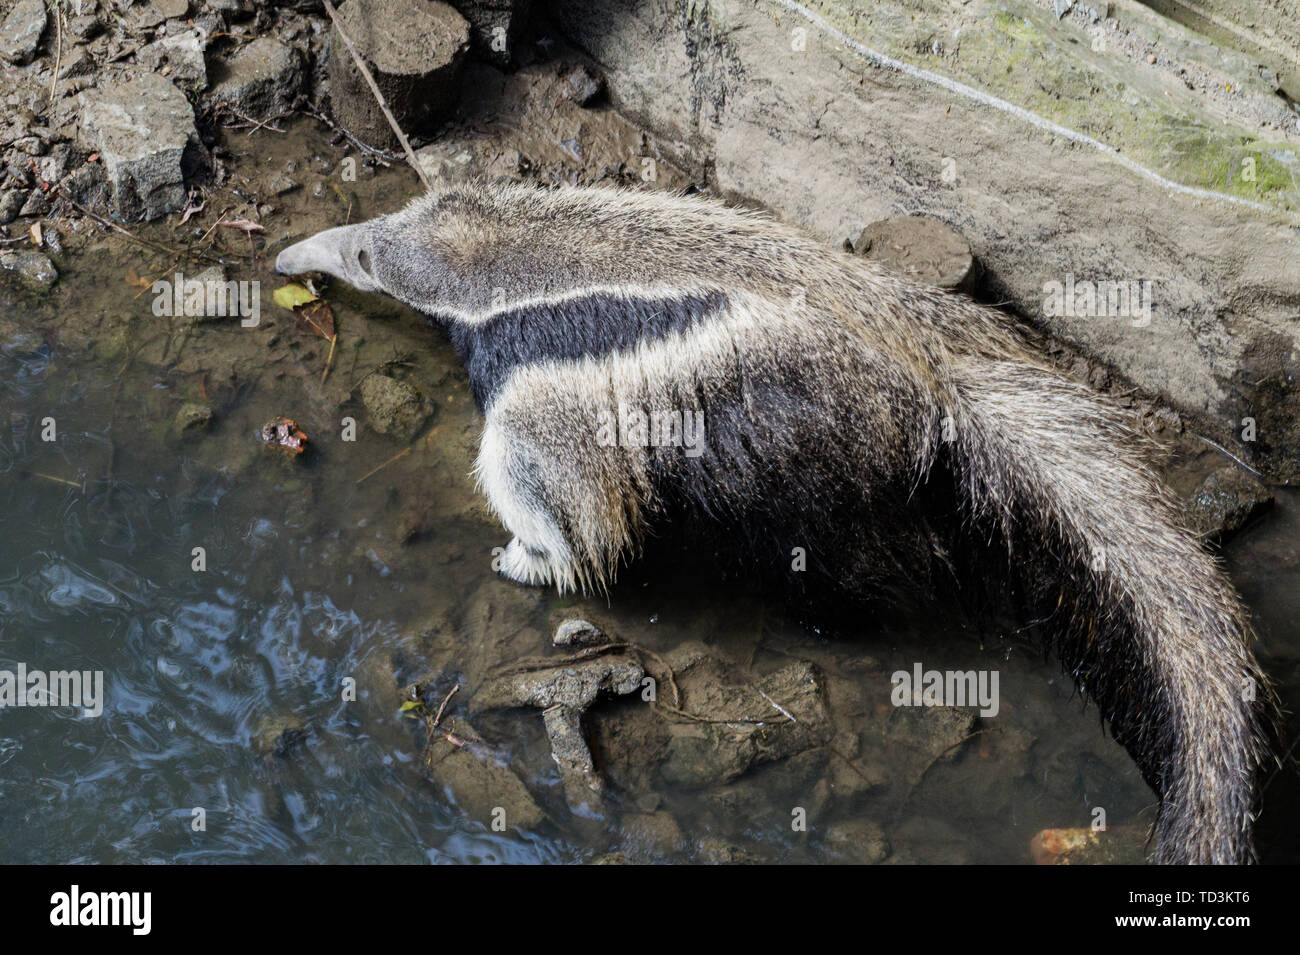 Whole anteater in river from profile Stock Photo